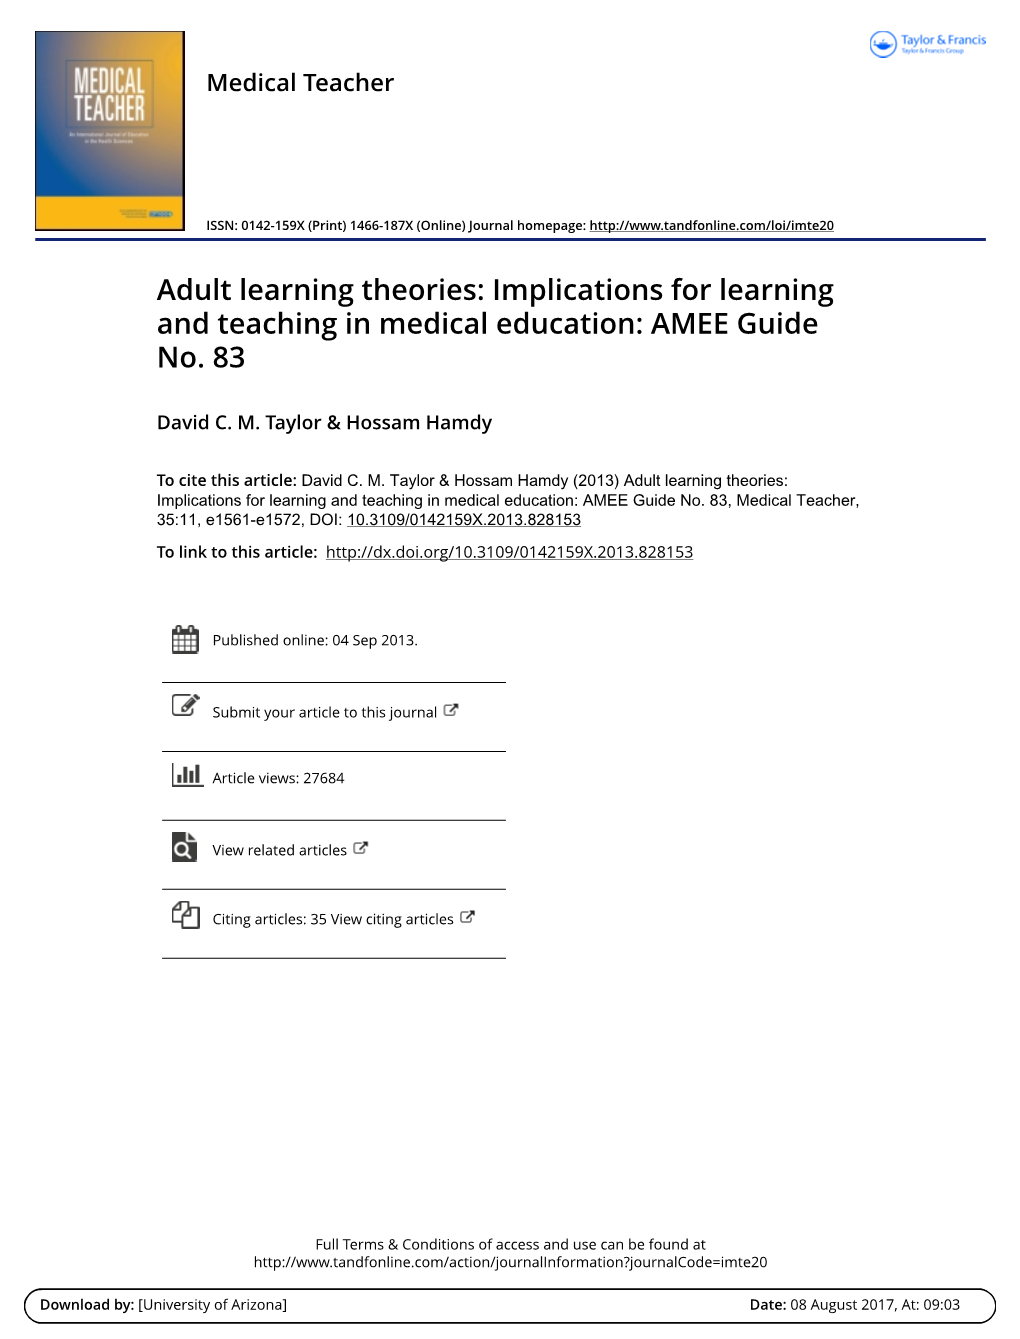 Adult Learning Theory & Medical Education